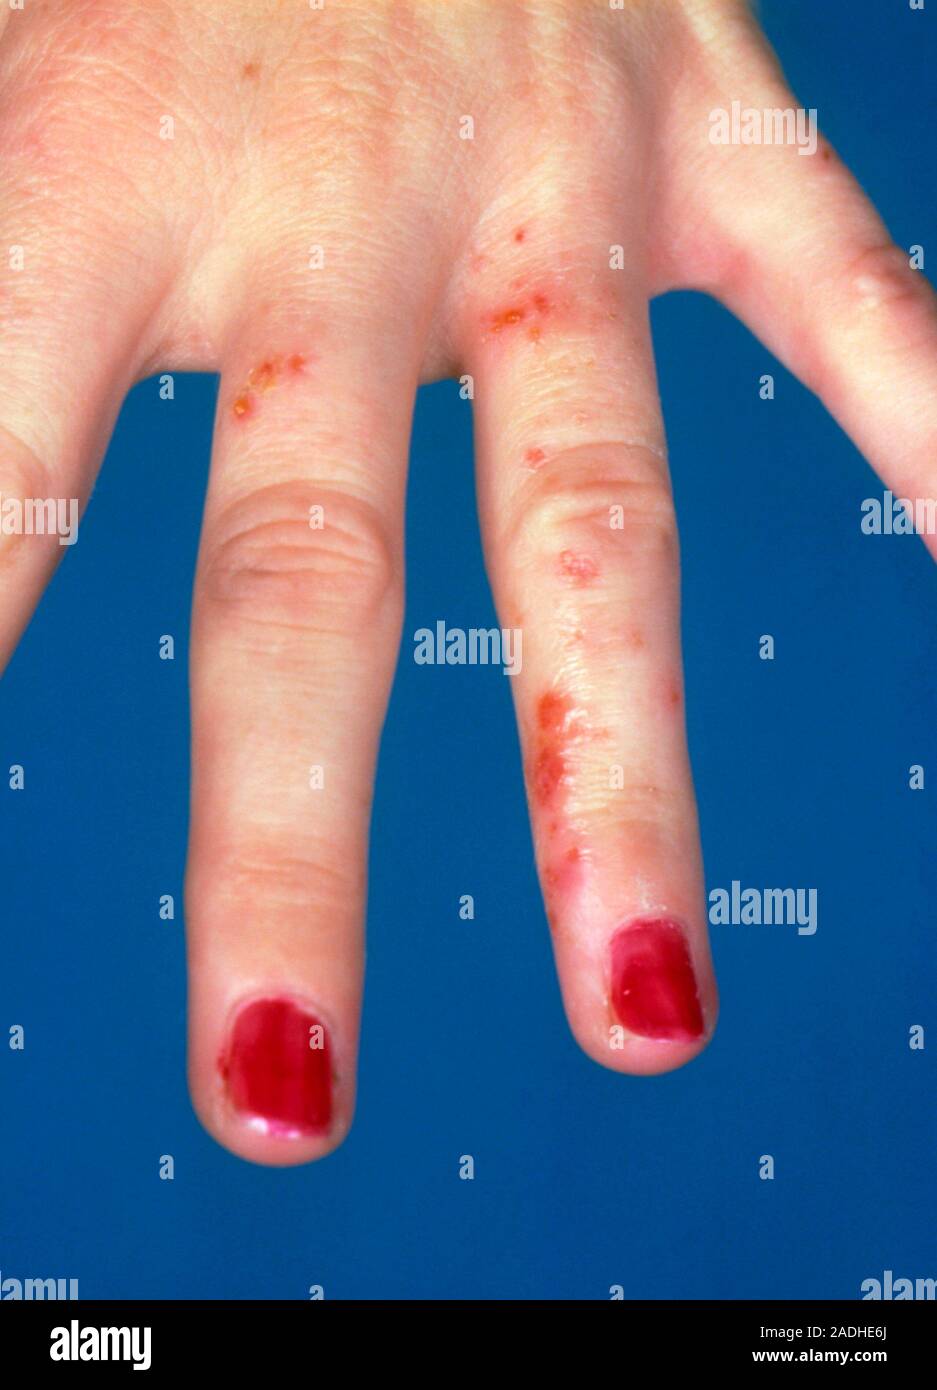 Ordinary Photograph Showing Contact Dermatitis Affecting The Skin